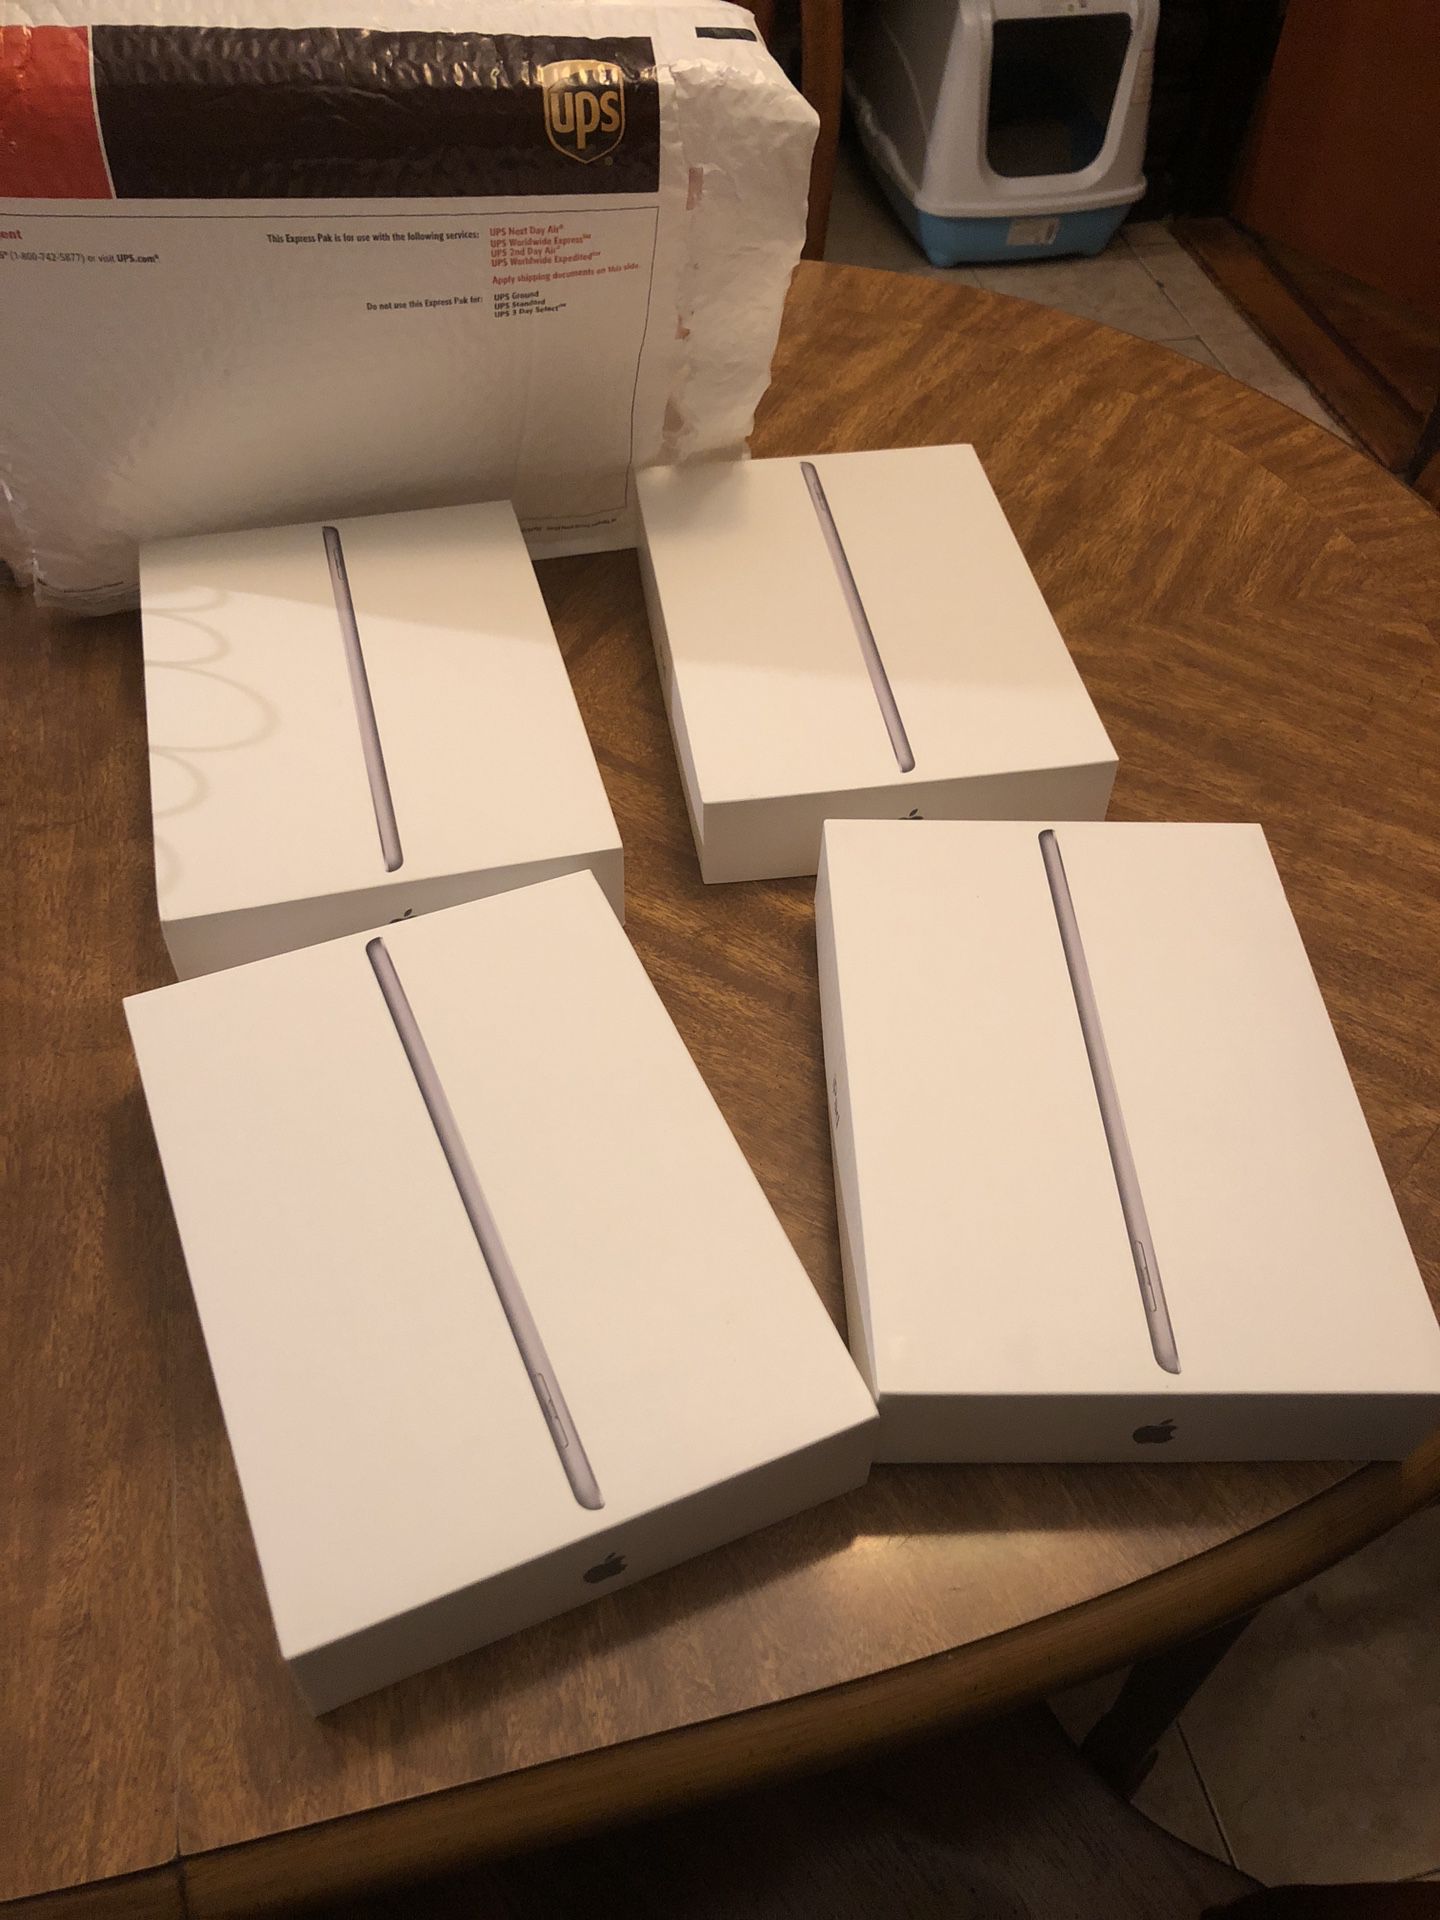 BRAND NEW IPAD 6 GENERATION WIFI AND 4G LTE AND 1 YEARS WARRANTY FROM APPLE ESCH ONE $280